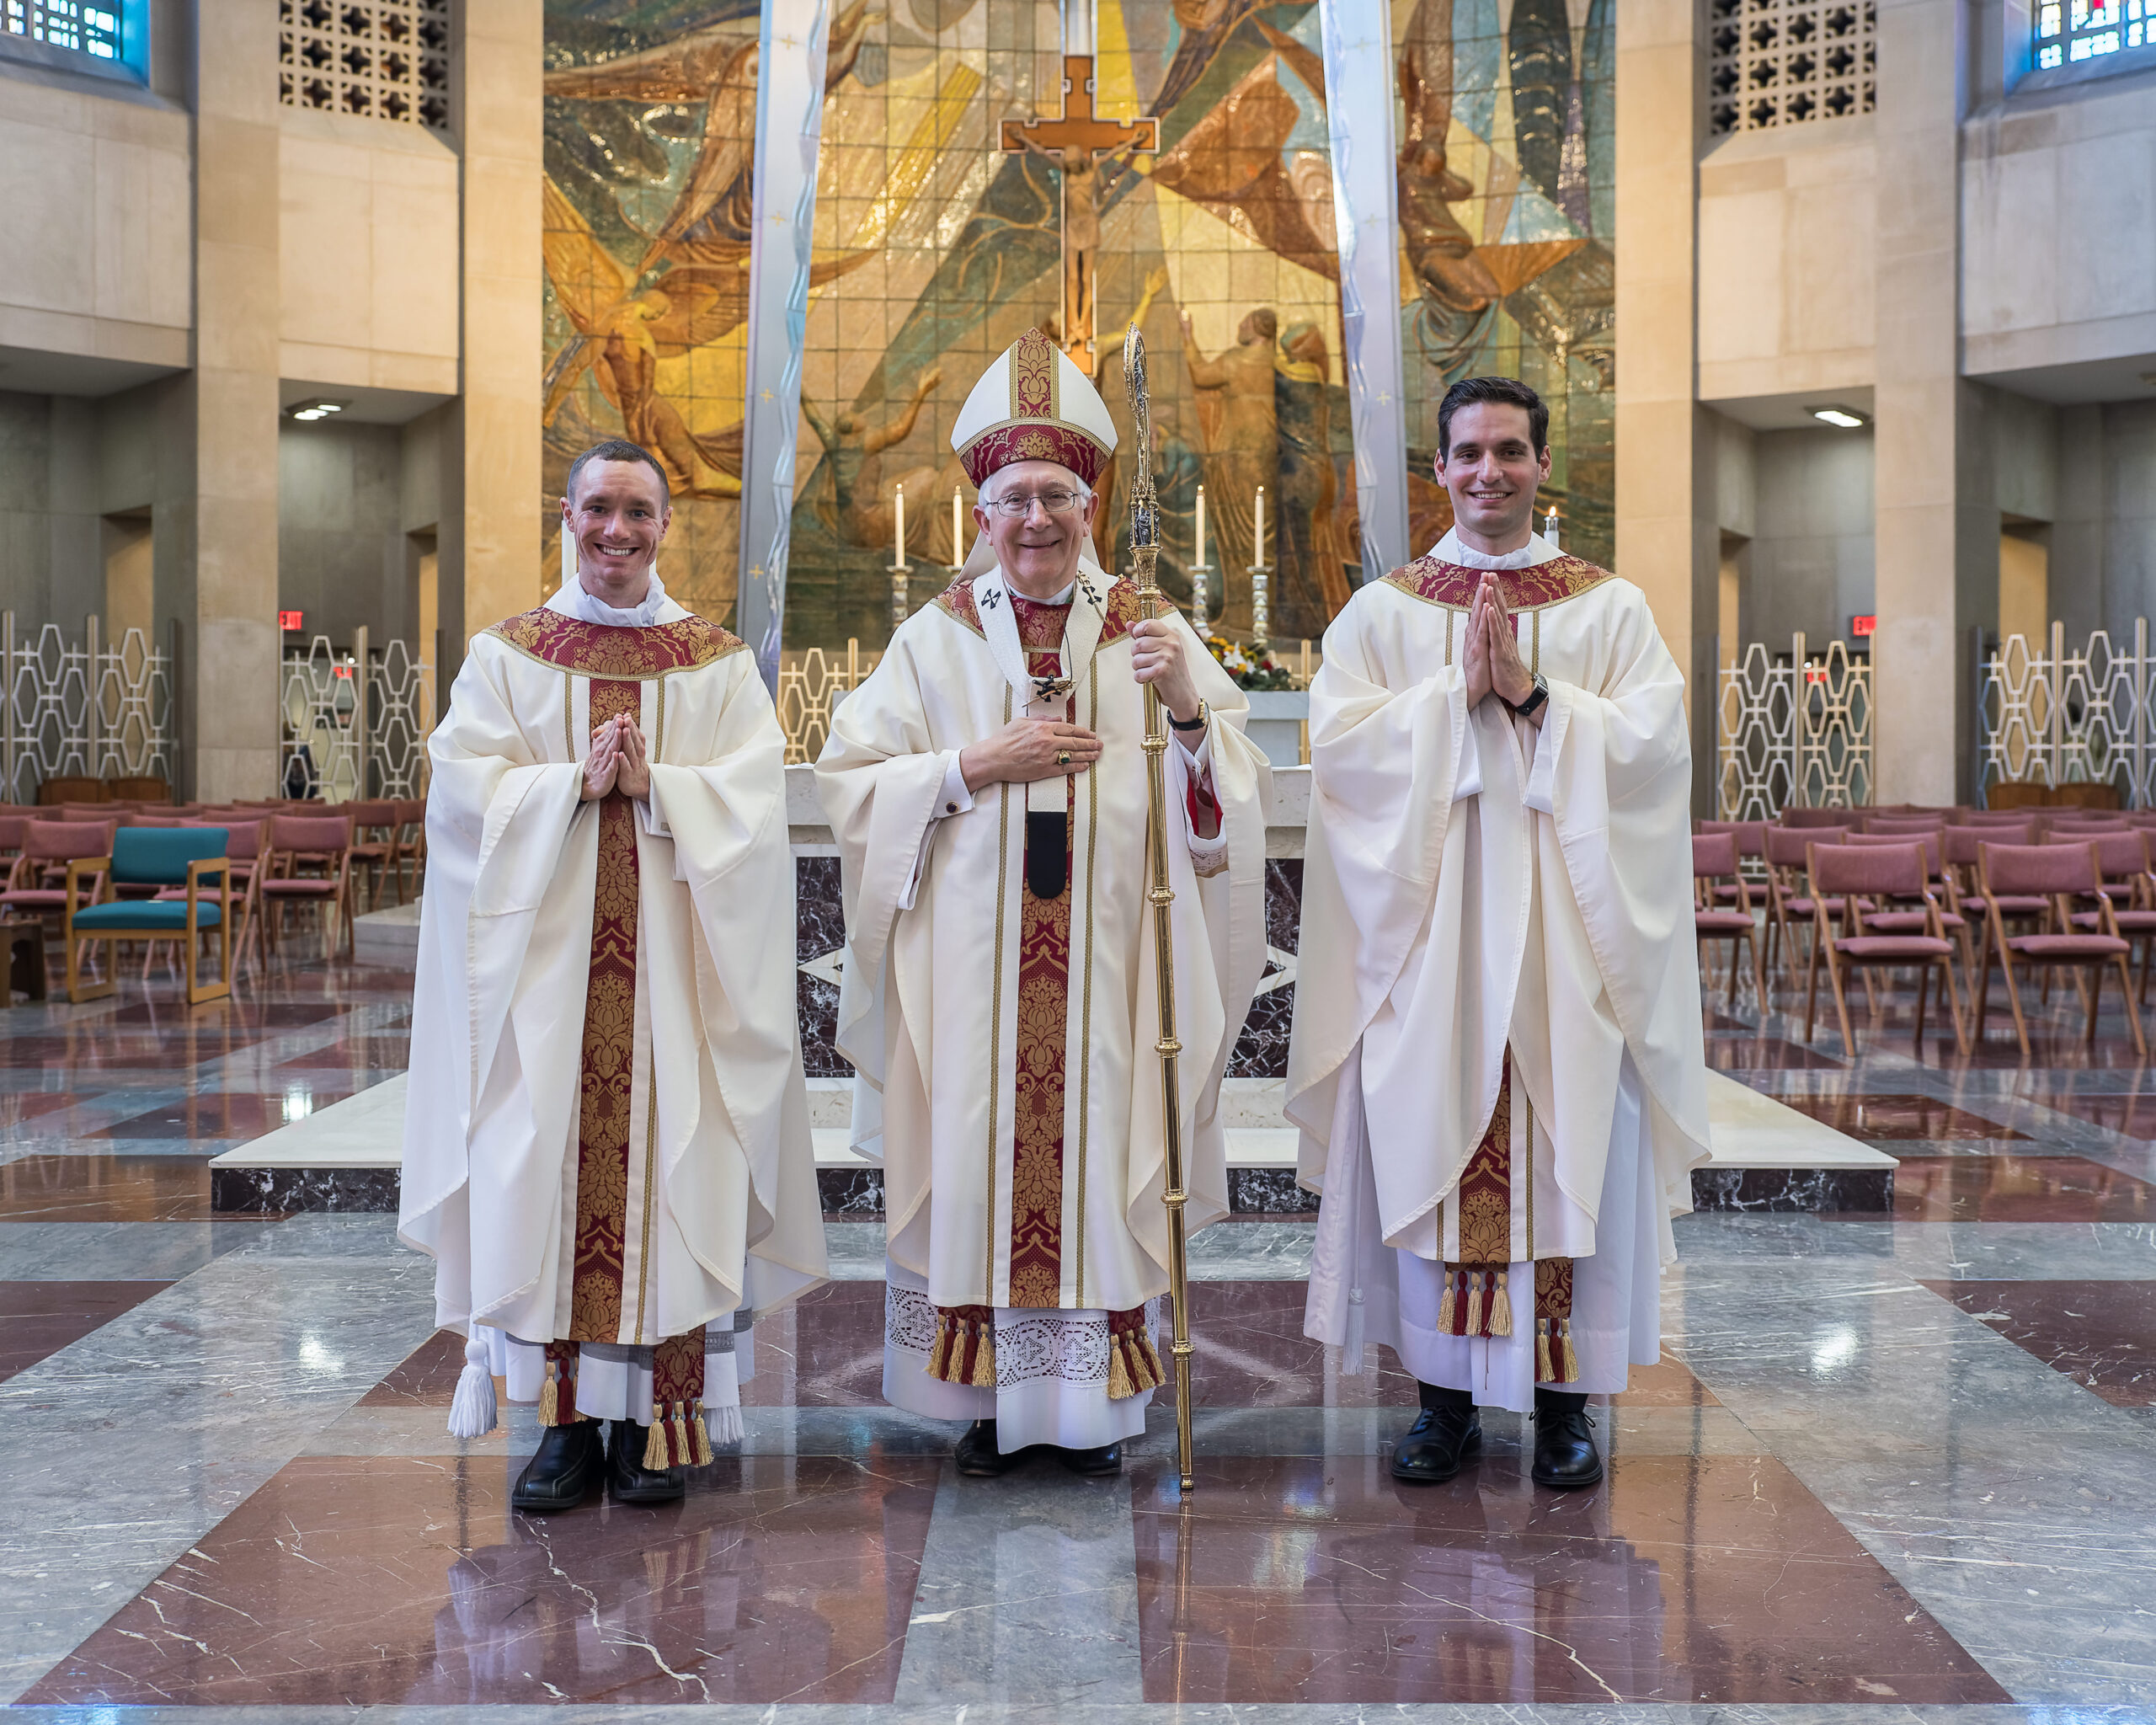 Archbishop Leonard P. Blair is flanked by two new priests for the Archdiocese of Hartford, Father Matthew Collins, left, and Father Joseph MacNeill, right, who were ordained June 26 at the Cathedral of St. Joseph in Hartford. Photo by Aaron Joseph